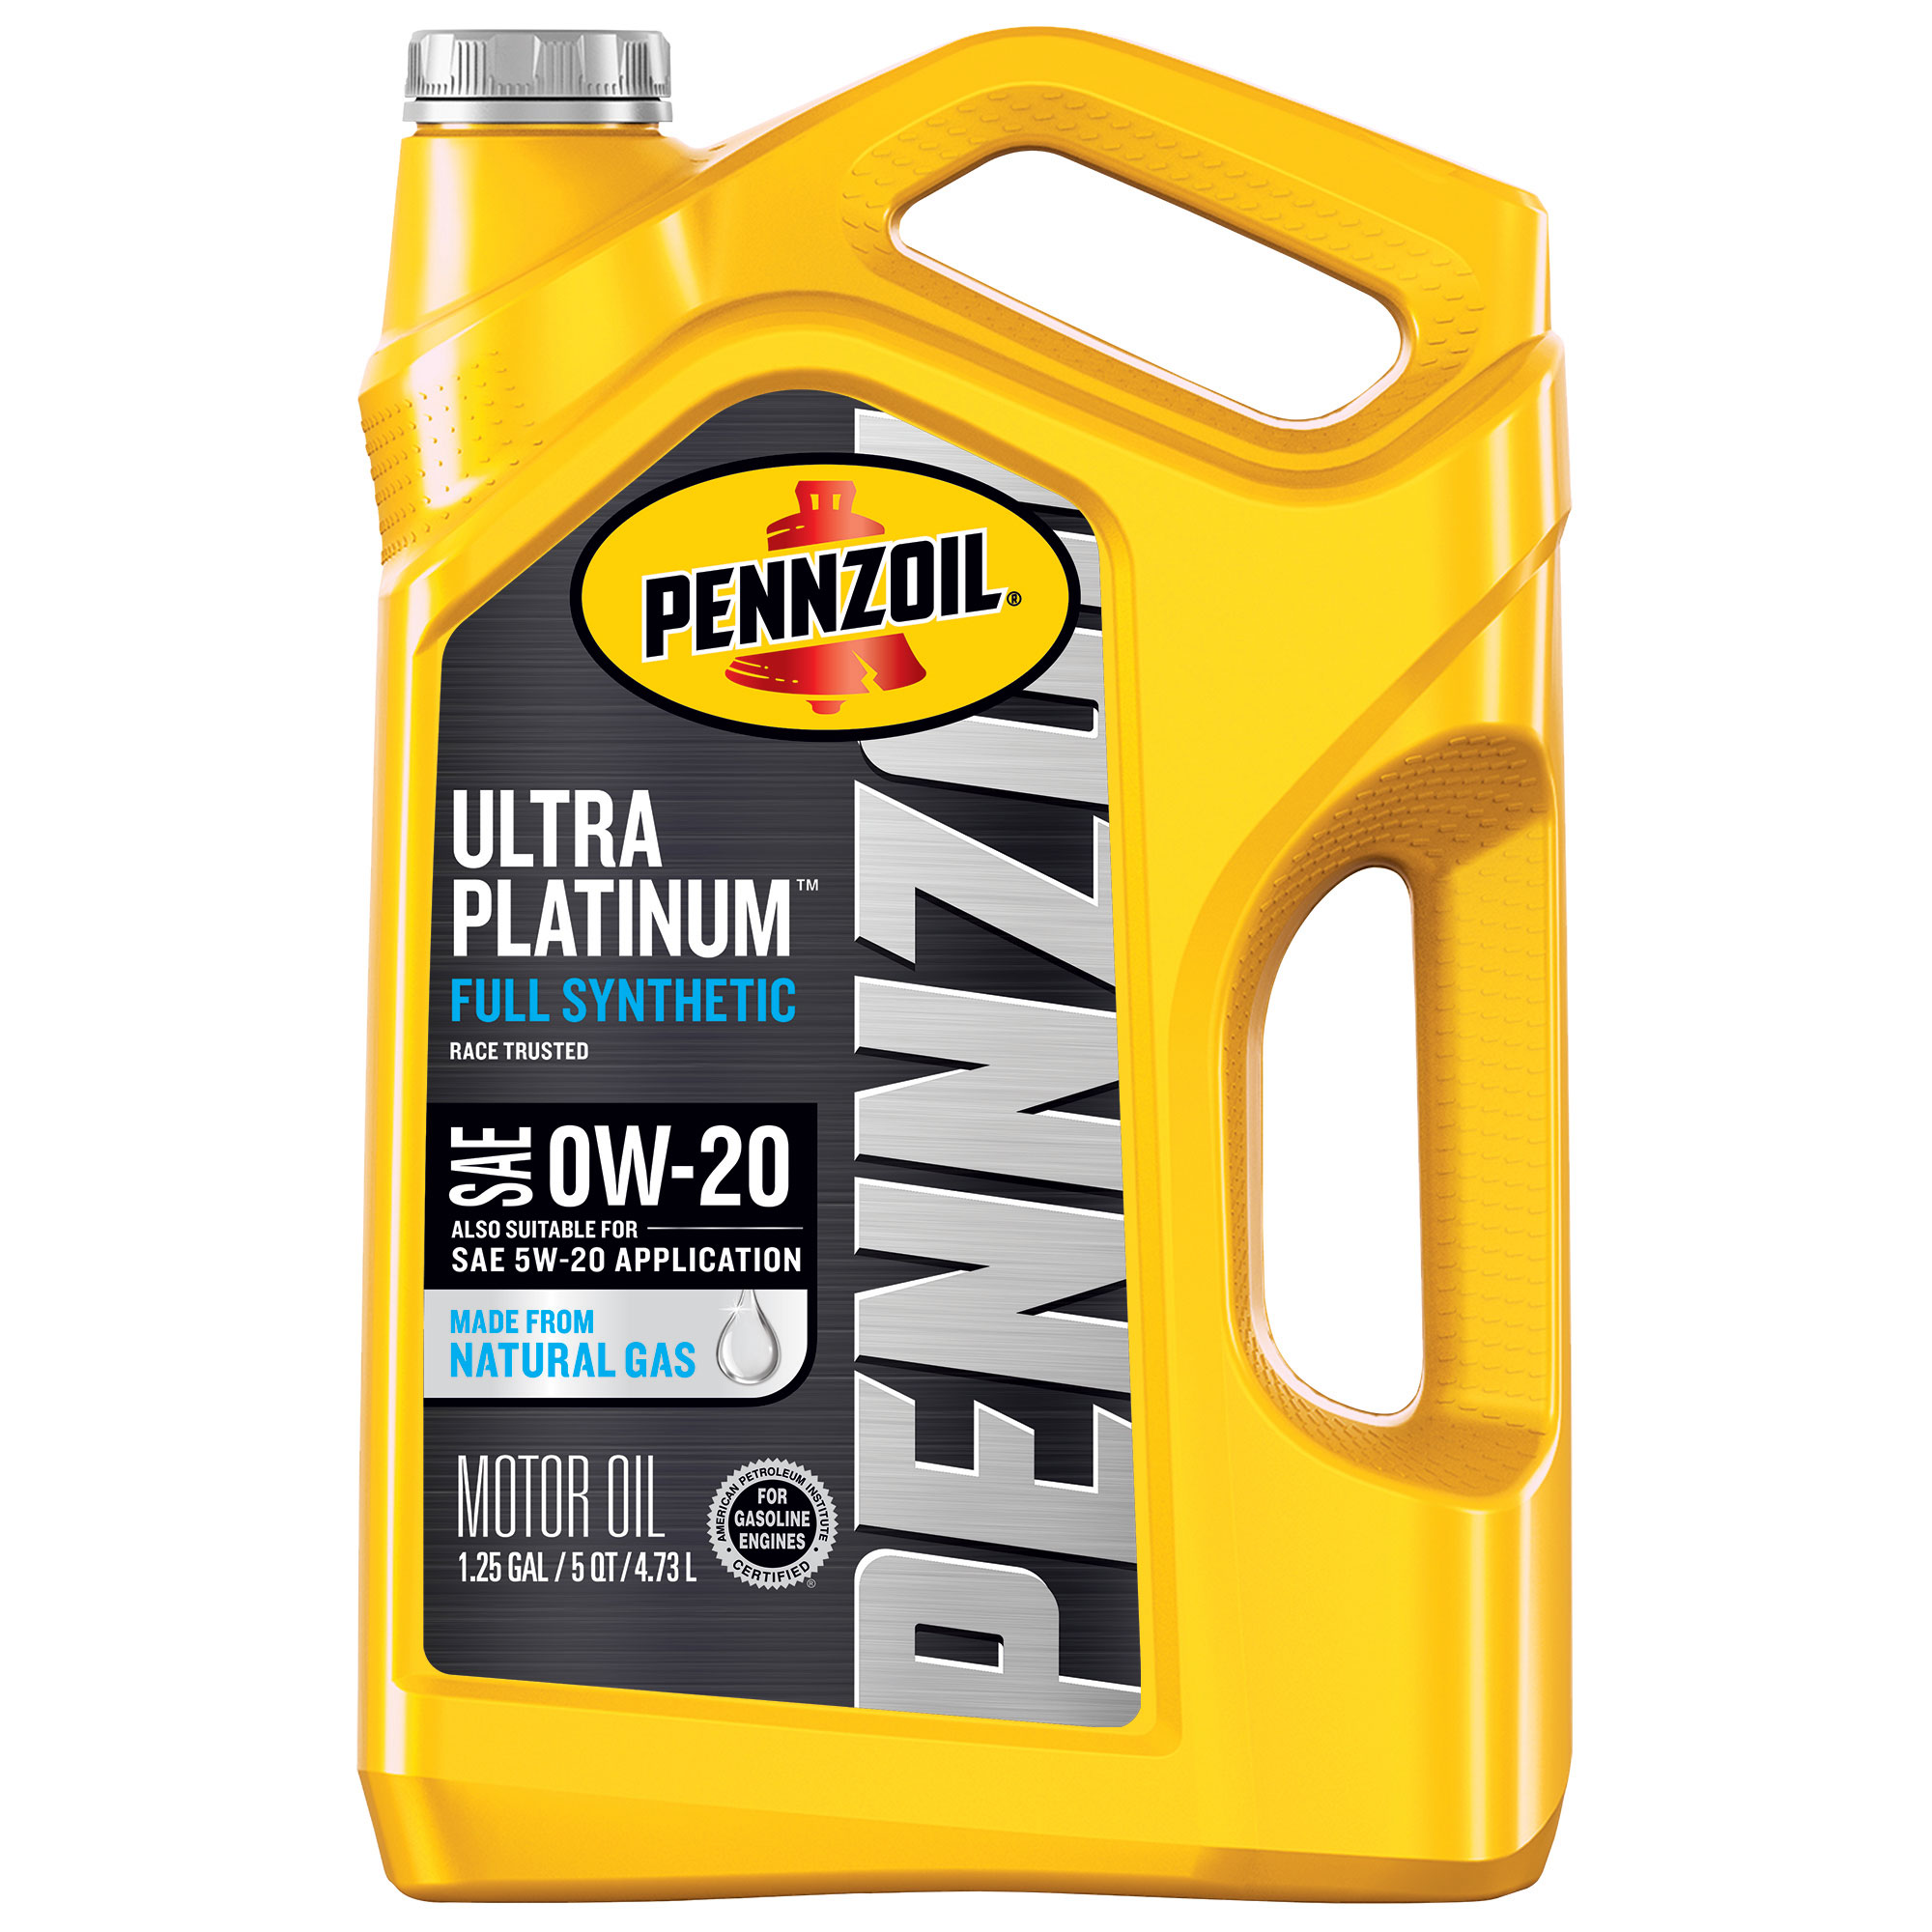 Pennzoil 0W-20 Full Synthetic Oil at Walmart